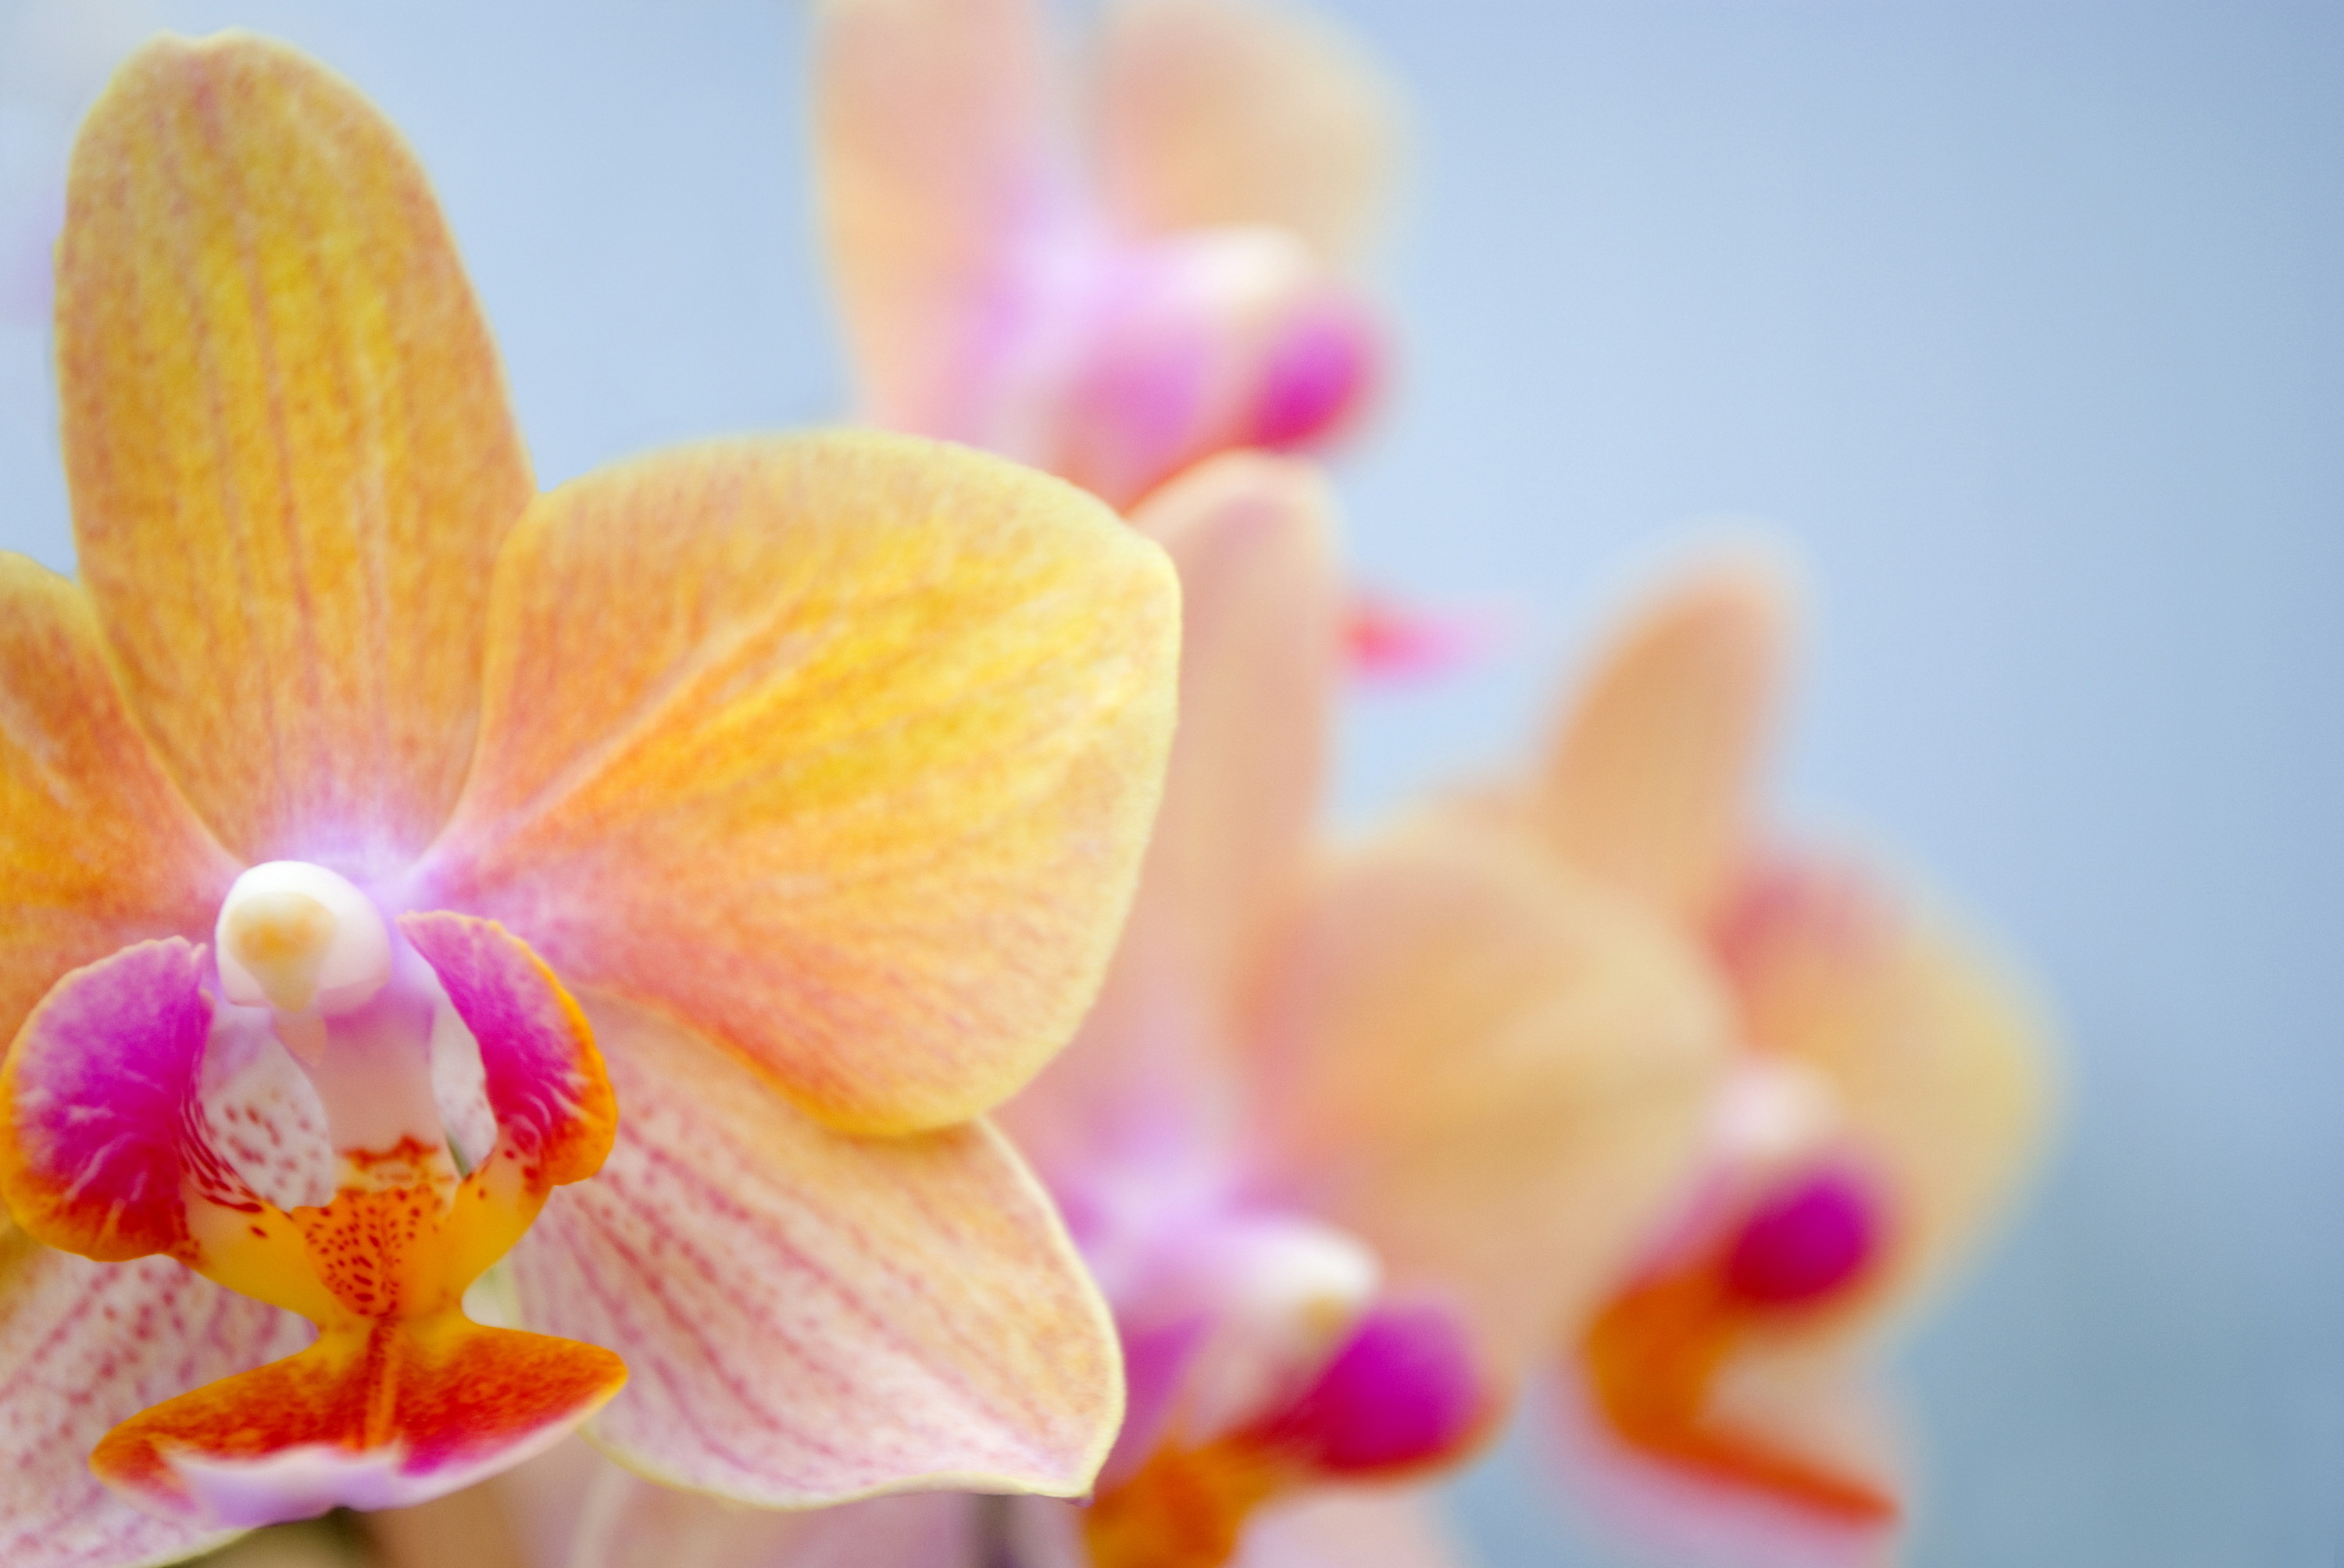 Orchid flower in natural setting